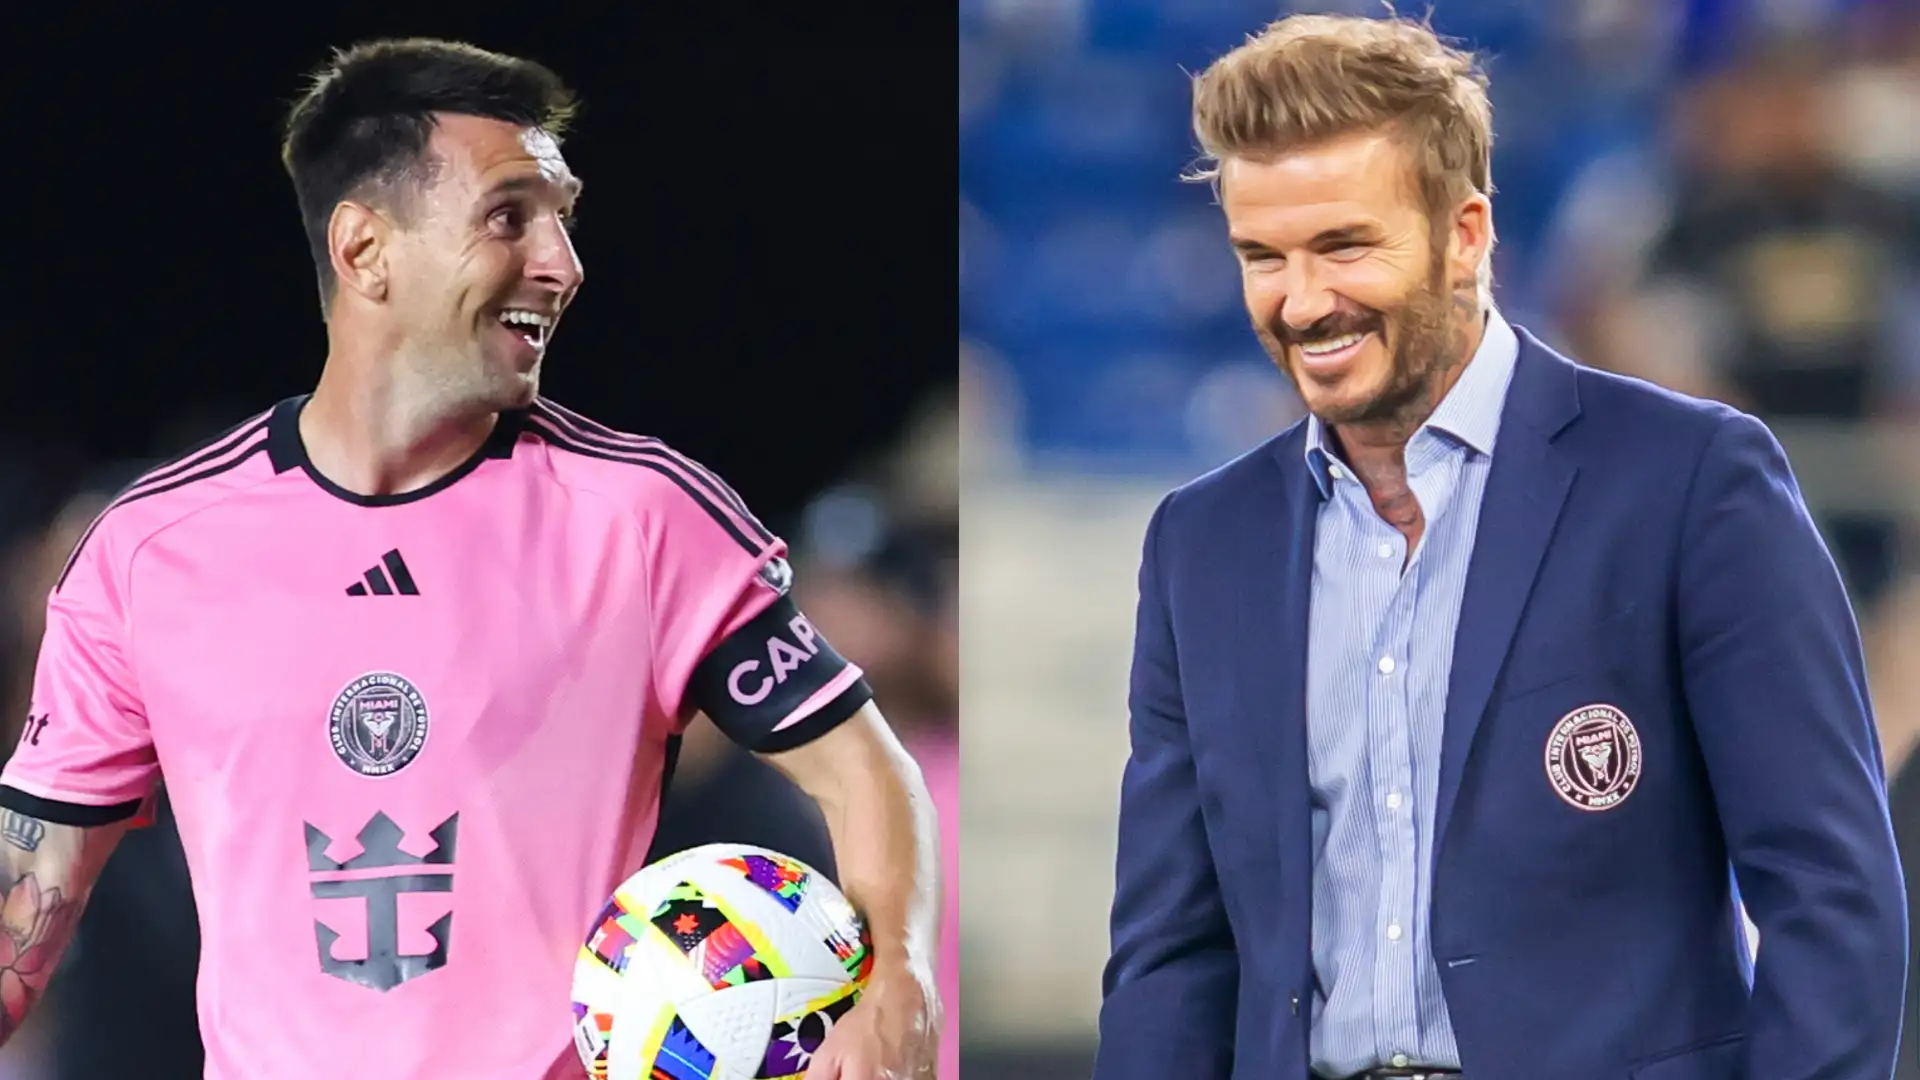 ‘To the greatest’ – Lionel Messi shows off enormous birthday present from David Beckham as Inter Miami superstar celebrates turning 37